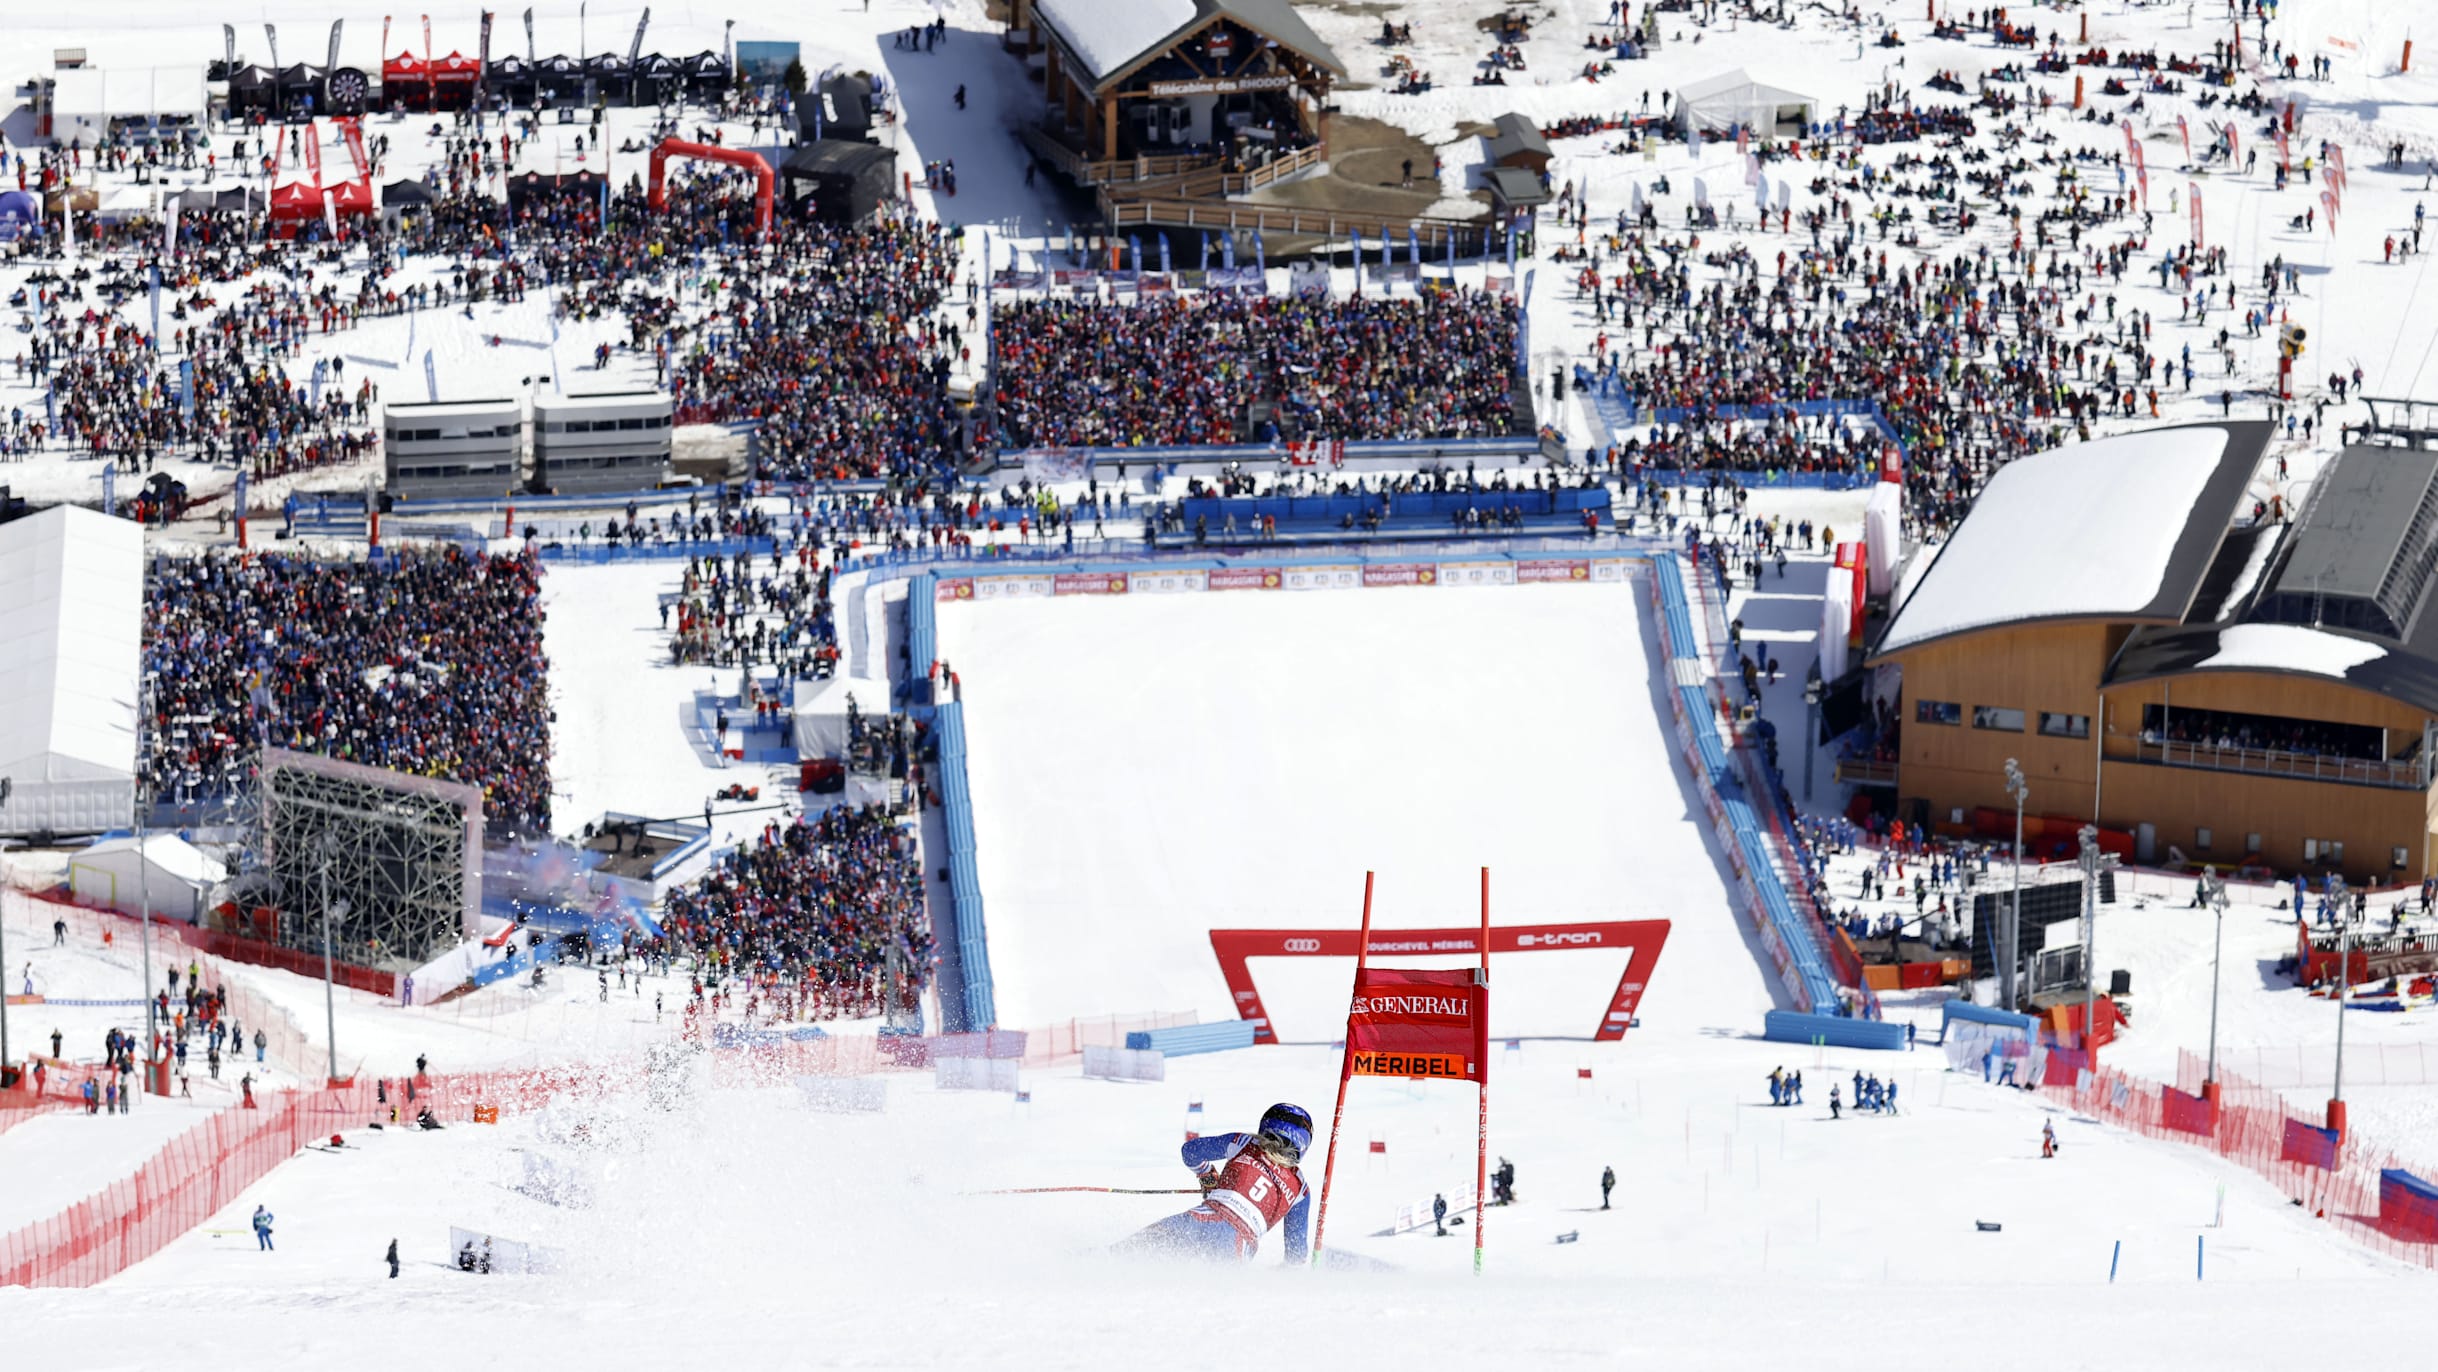 2023 Alpine Ski World Championships in Courchevel-Meribel Full schedule and how to watch live